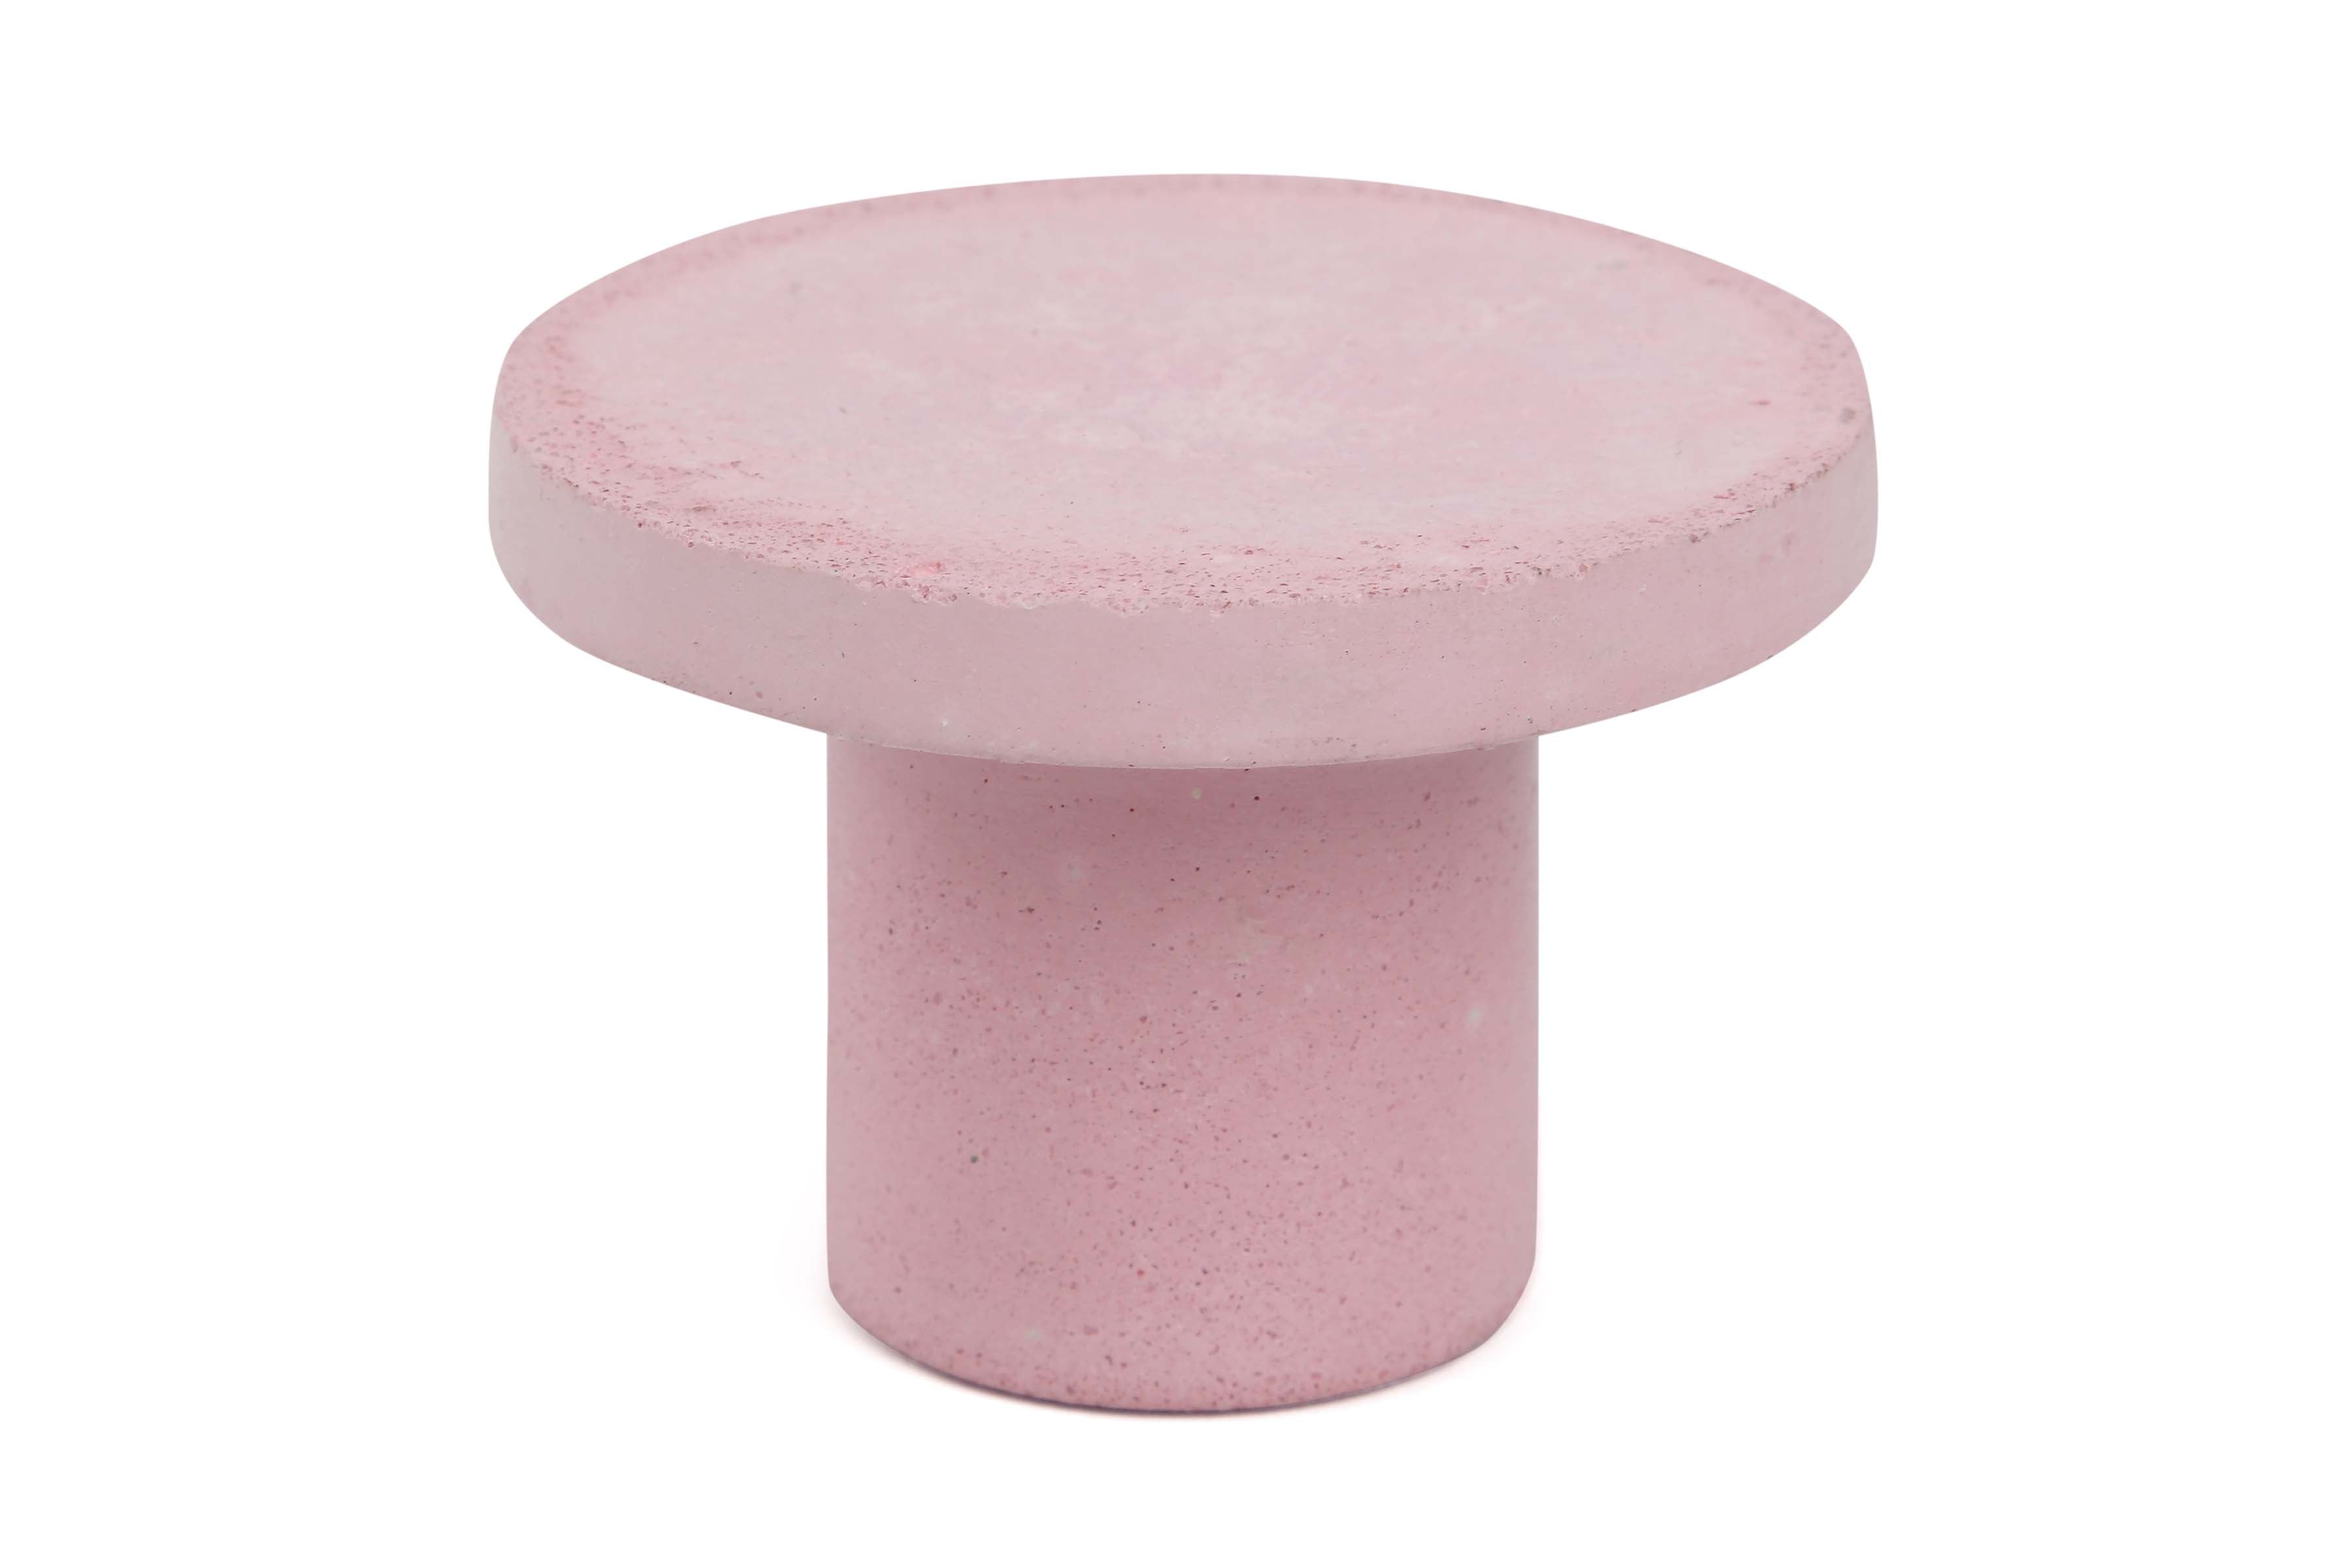 Minimalist Style Concrete Candle Holder - Pink  2x2.5Inch